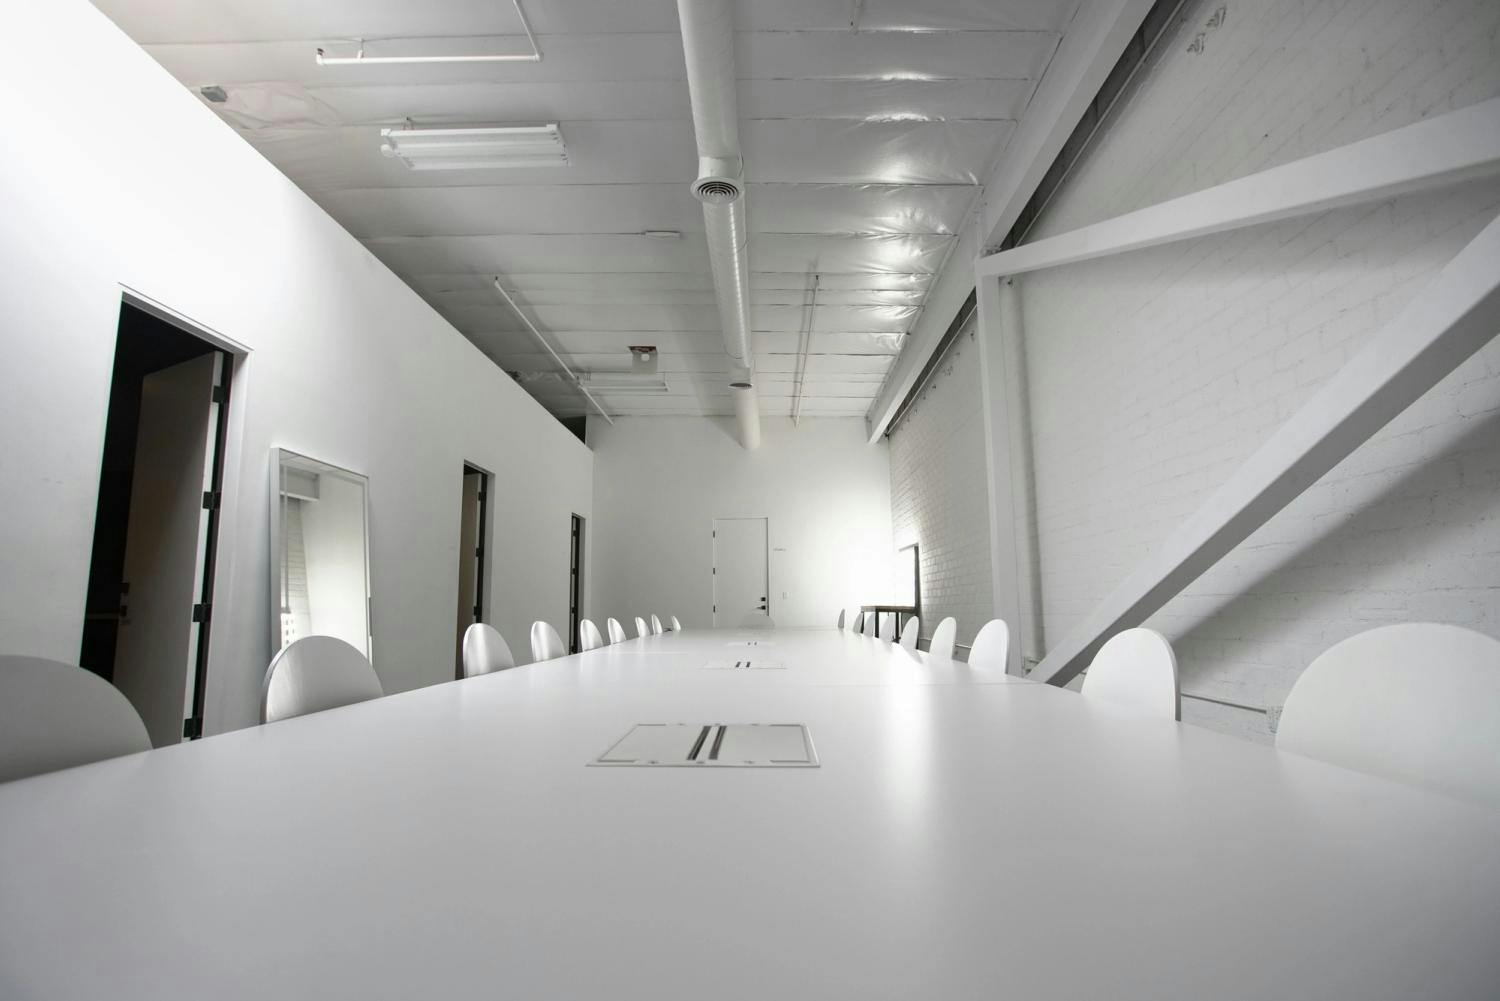 A modern meeting room with a long white table, white chairs, and white brick walls, complemented by industrial ceiling elements and ductwork.